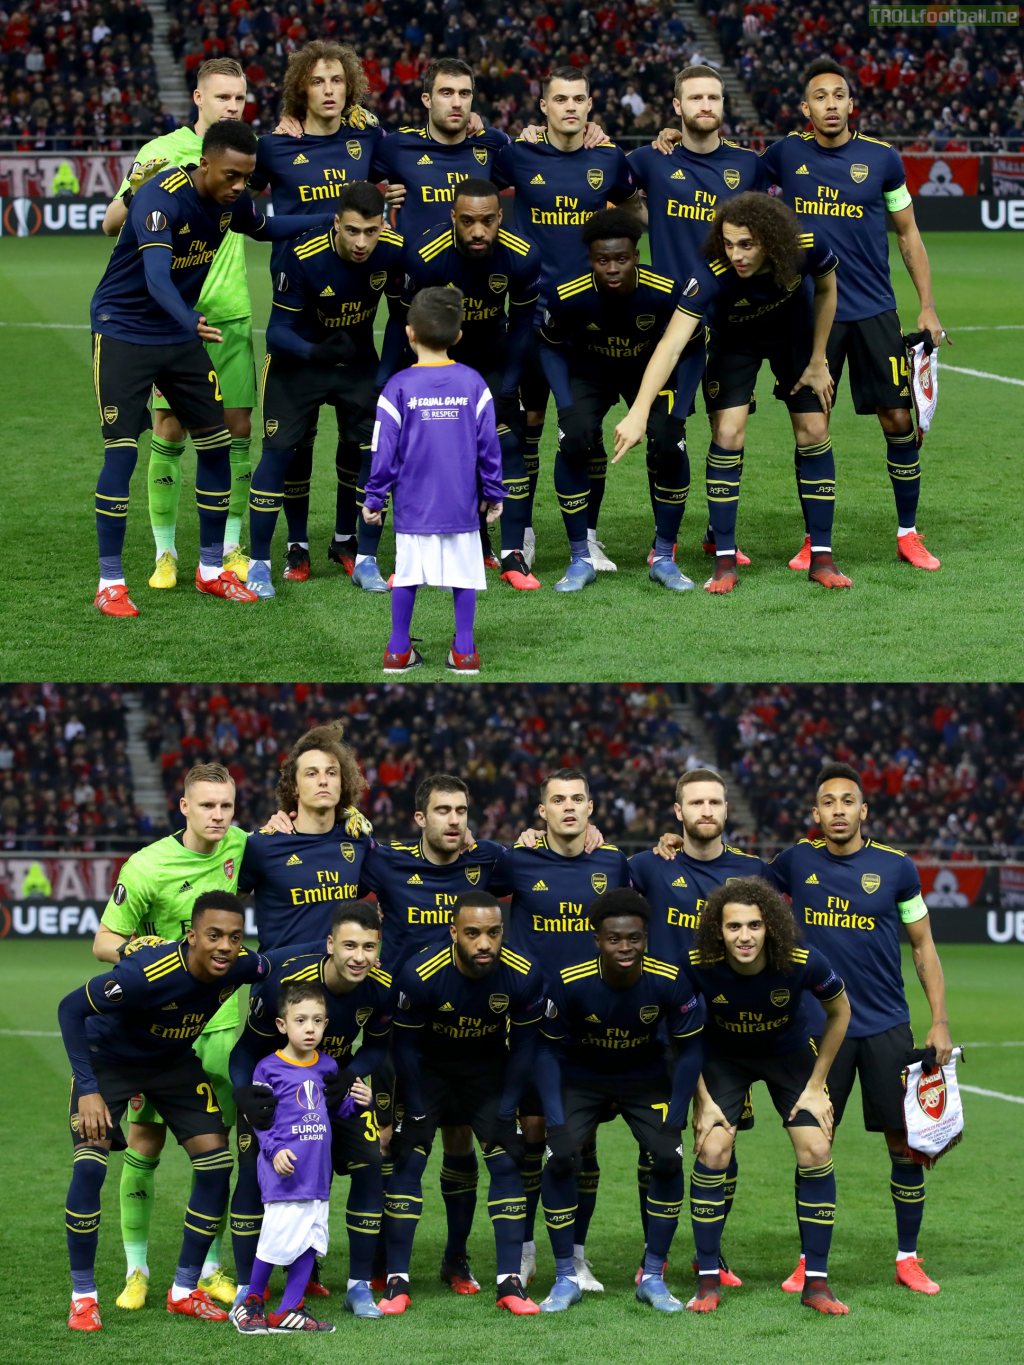 Confused mascot doesn't know where to go after the pre-match walk-out. Gets pulled into the Arsenal team picture.